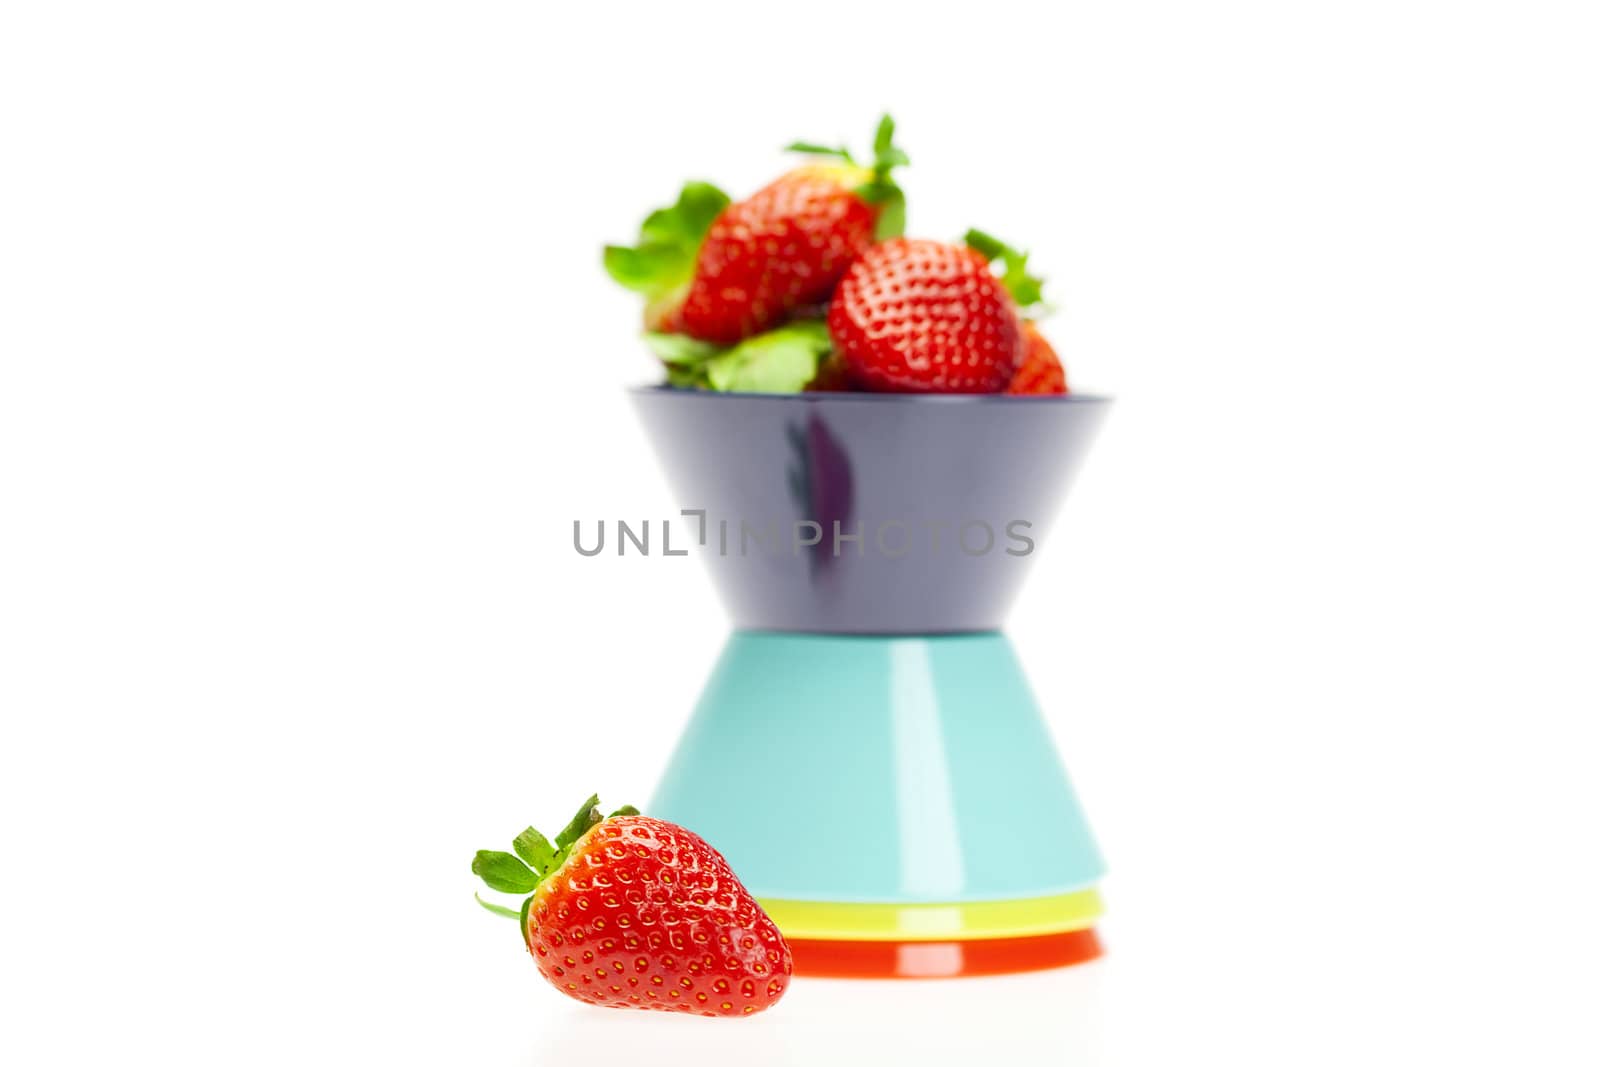 juicy strawberries in a bowl isolated on white